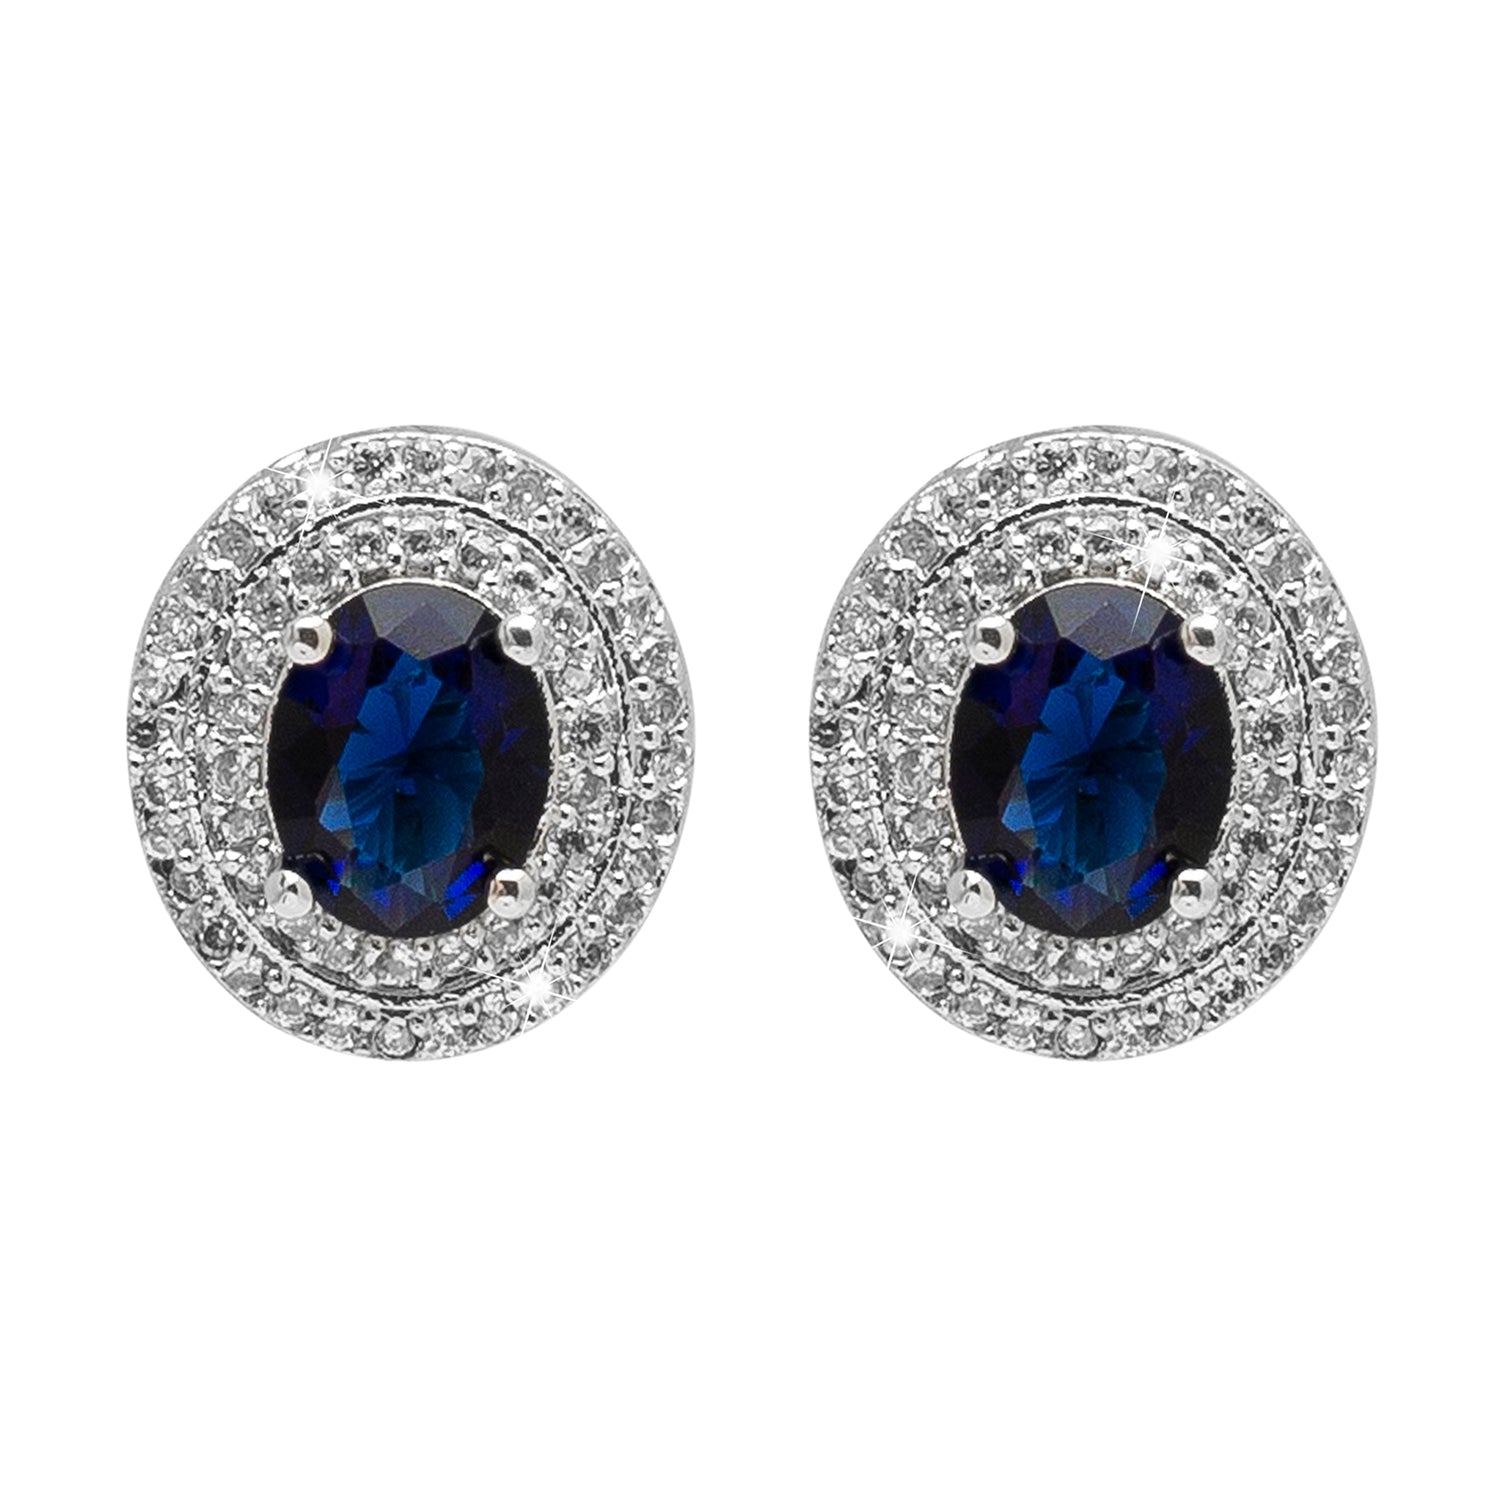 Sapphire blue stone earrings with cz pointers and pearl drop -